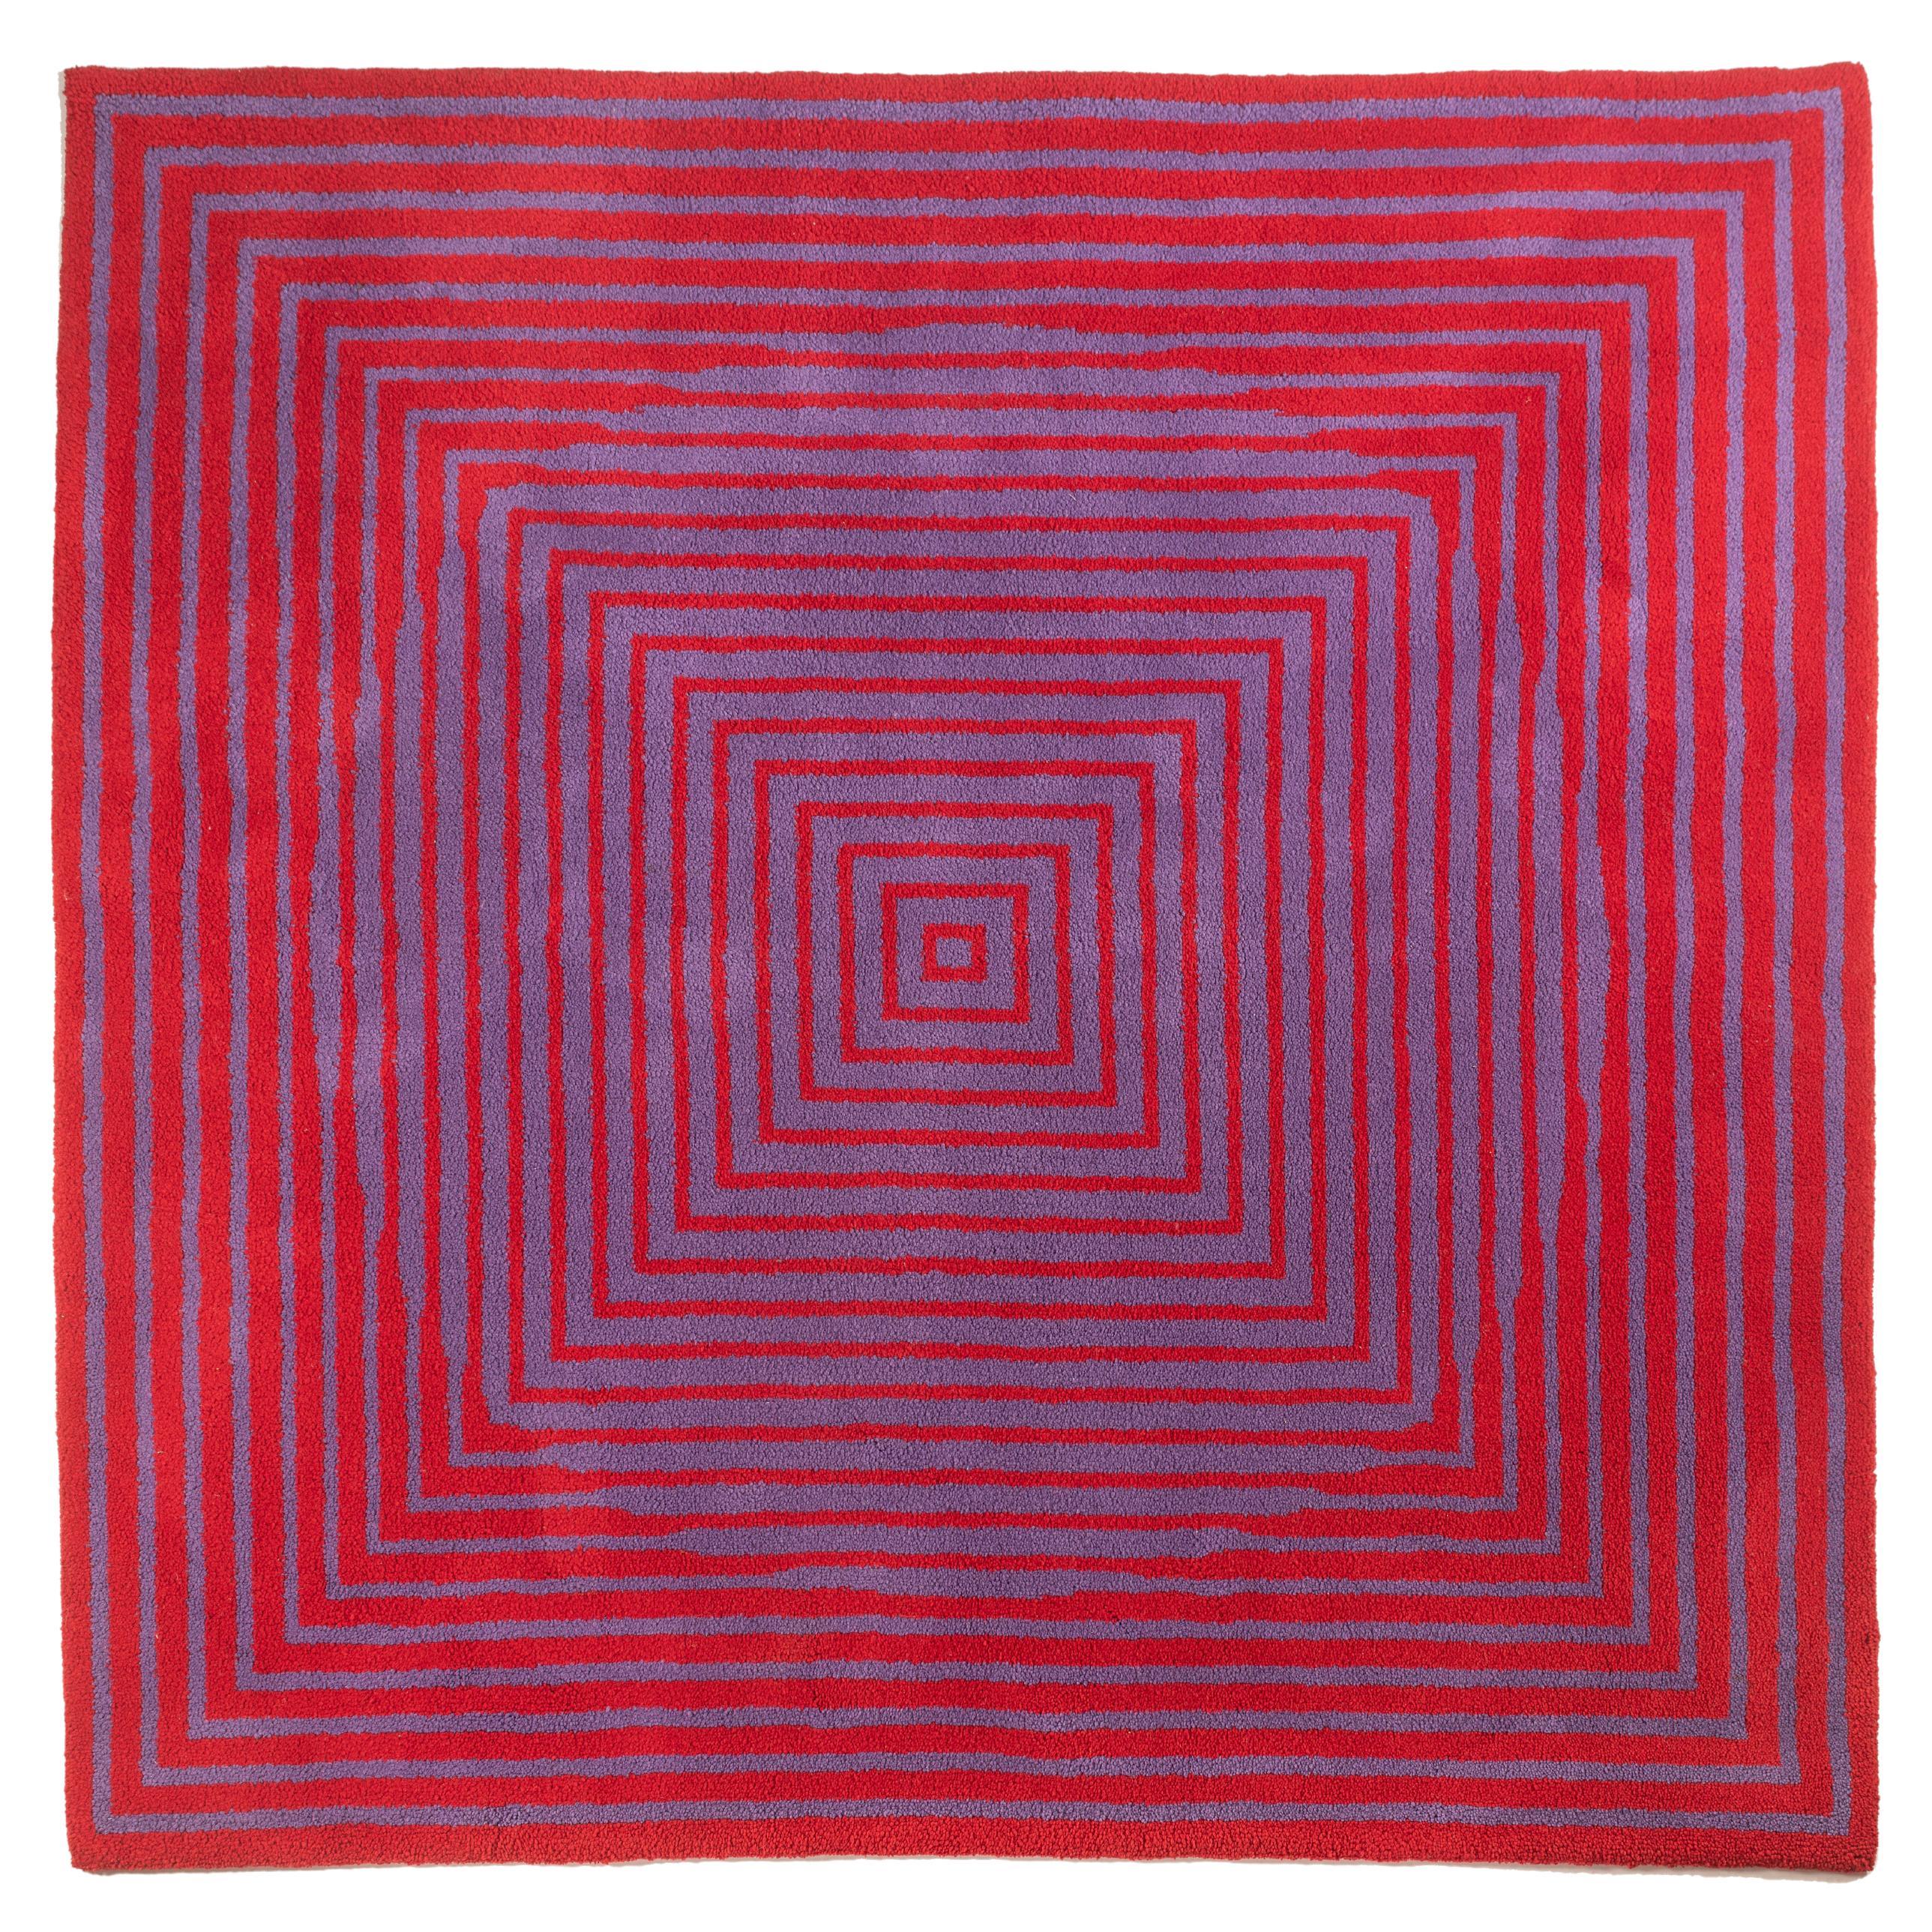 Victor Vasarely Tapestry/Rug, 1970's Edition 9/50